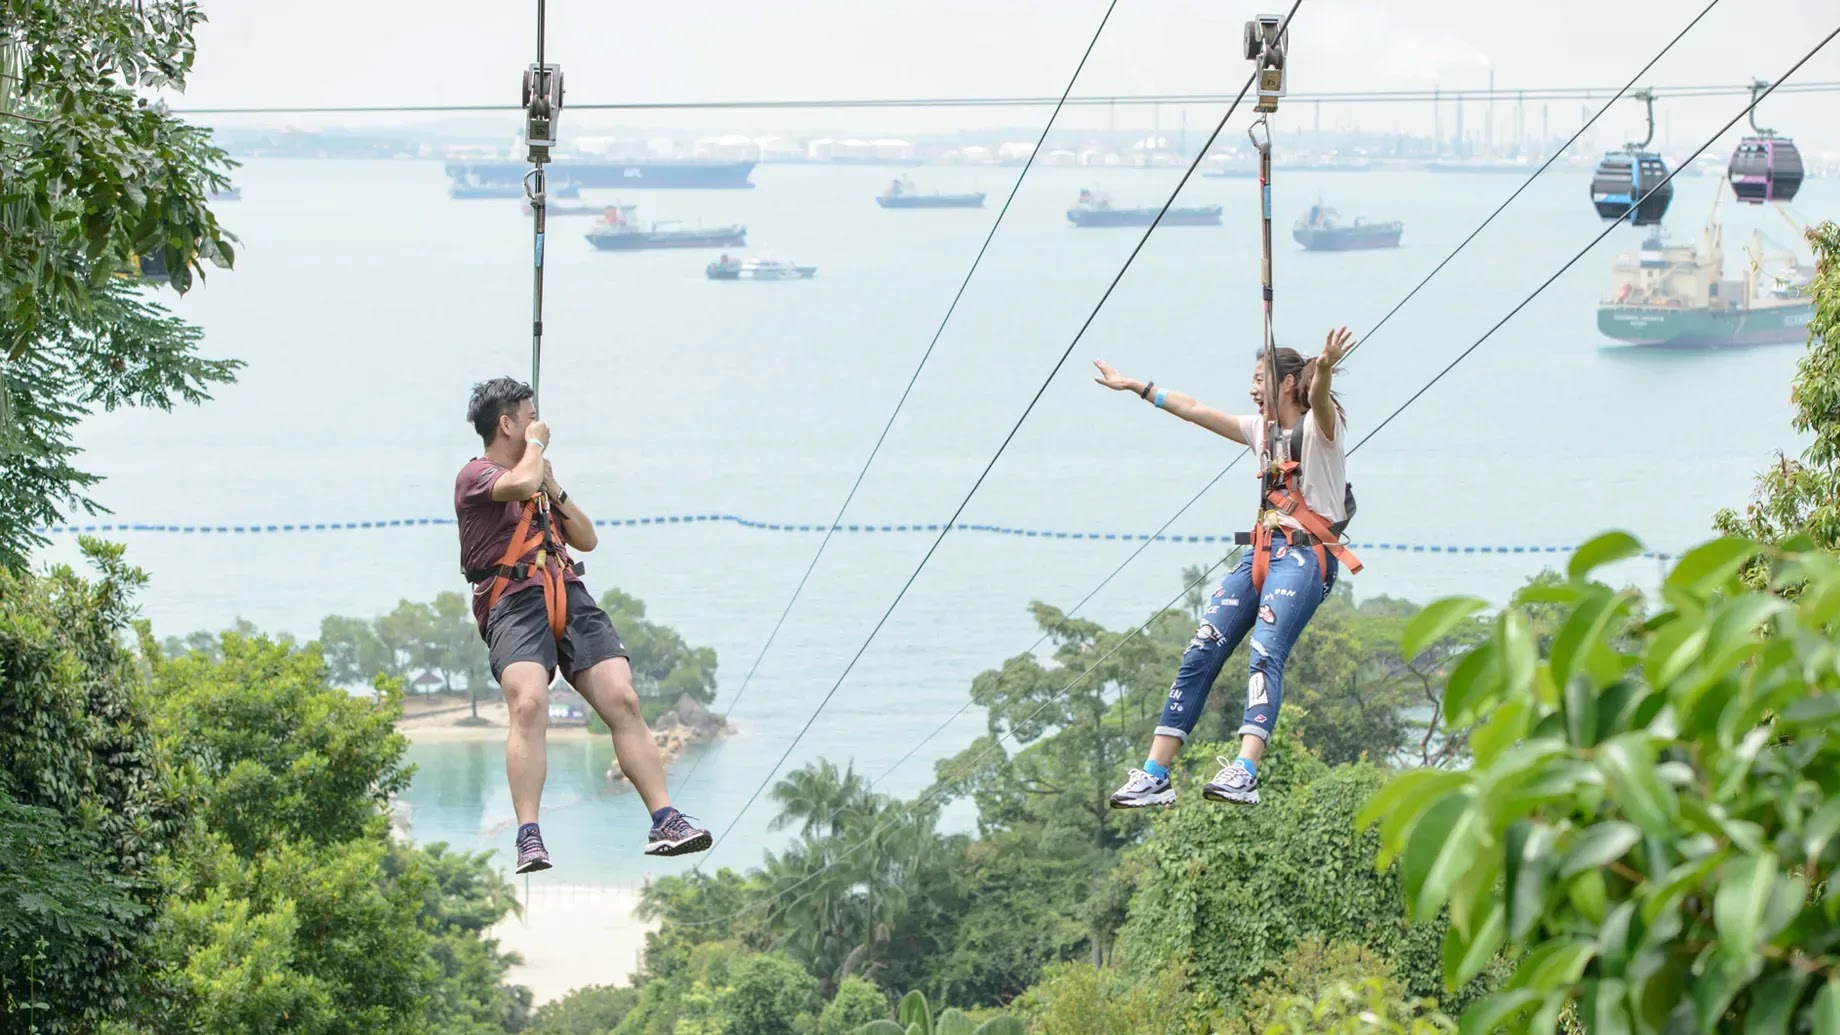 Fly High and Zip Away at MegaZip Adventure Park